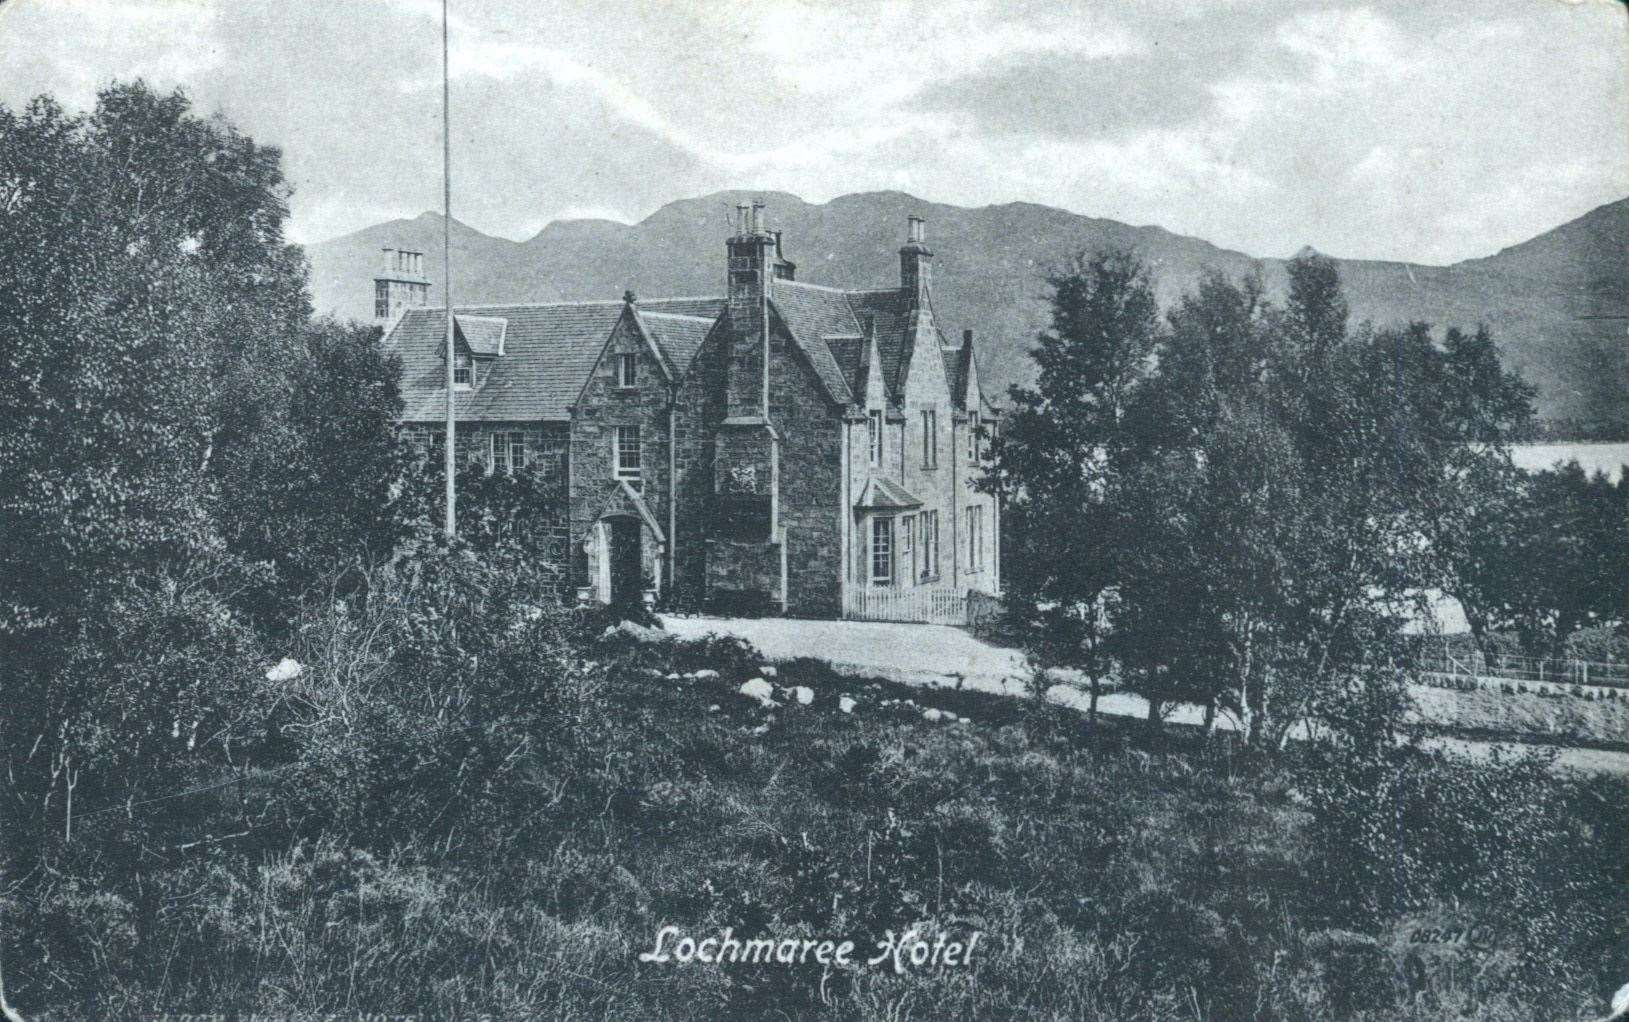 Loch Maree Hotel, where Queen Victoria stayed from the Gairloch Museum collection